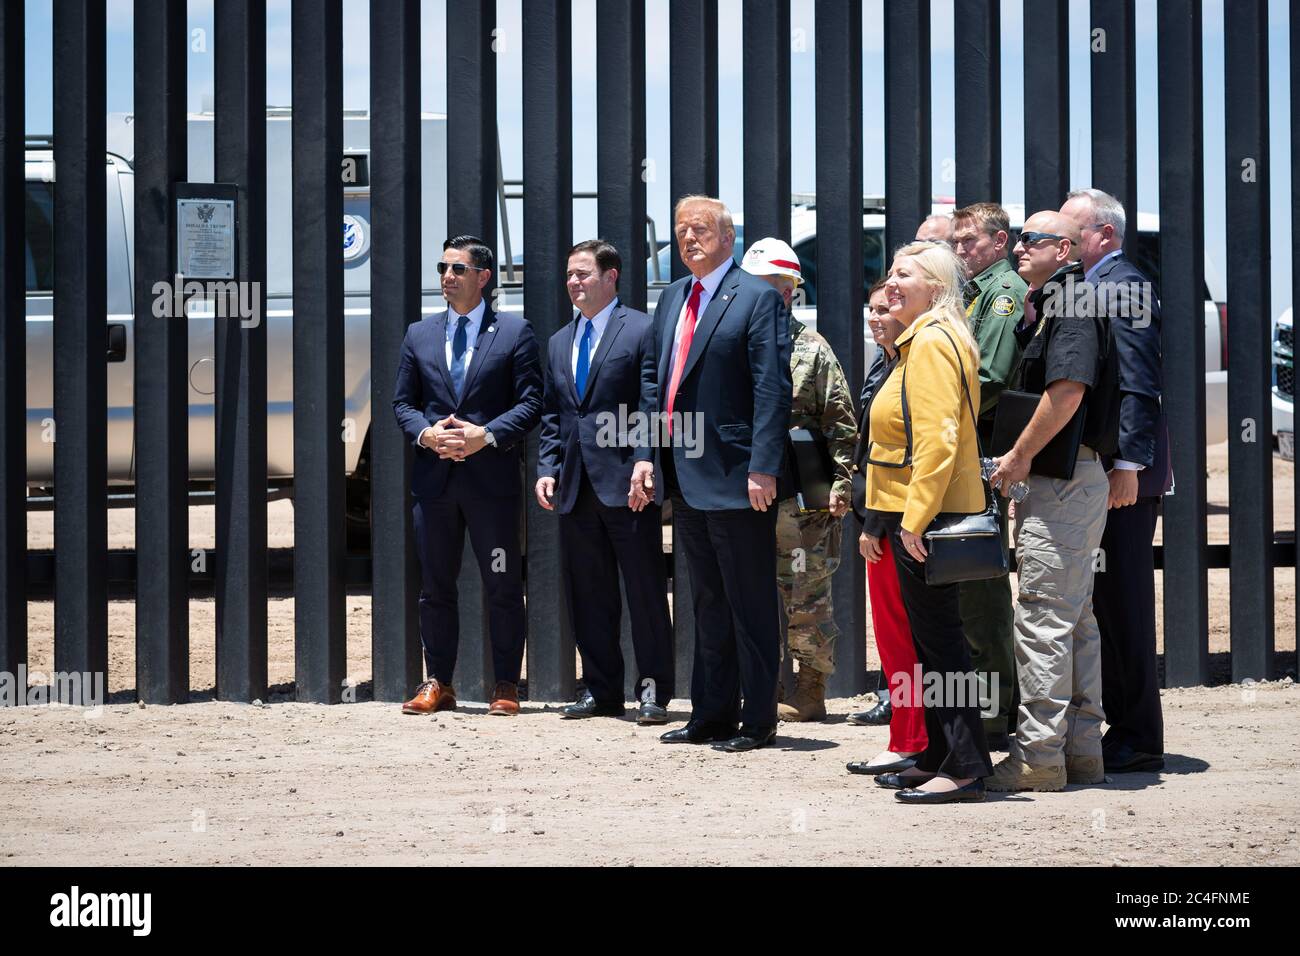 U.S. President Donald Trump along with Acting DHS Secretary Chad Wolf, Acting CBP Commissioner Mark Morgan, and Gov. Doug Ducey visit a new section of border wall along the Mexican-American border June 23, 2020 in San Luis, Arizona. The visit marked the completion of 200 miles of border wall, the majority of which is replacement for existing structure at a cost of $20-million dollars a mile. Stock Photo